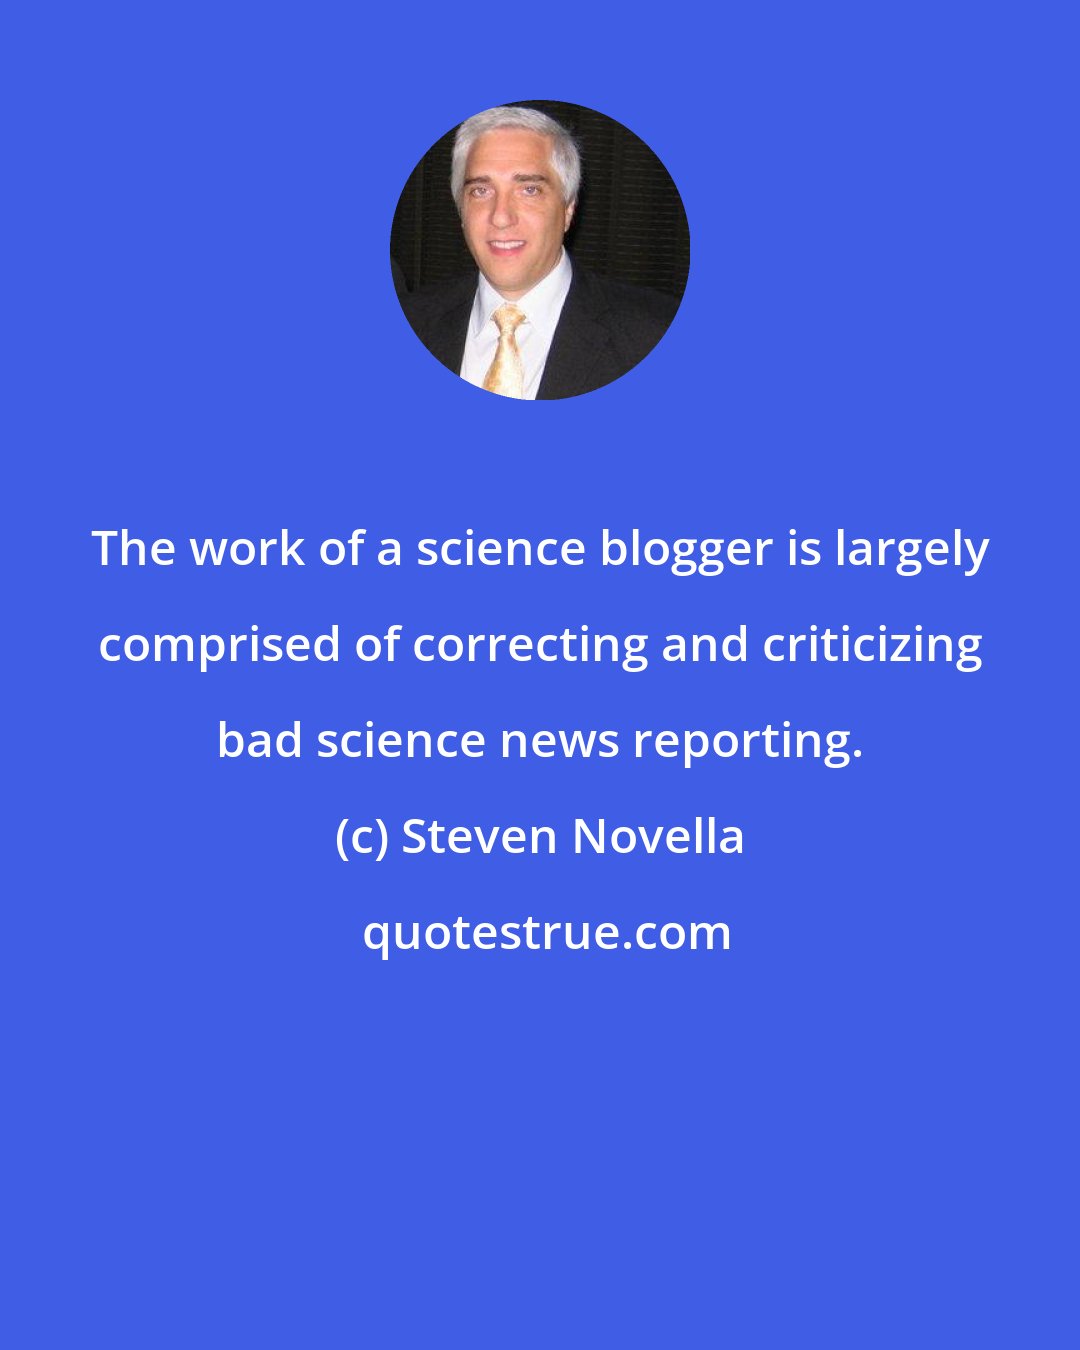 Steven Novella: The work of a science blogger is largely comprised of correcting and criticizing bad science news reporting.